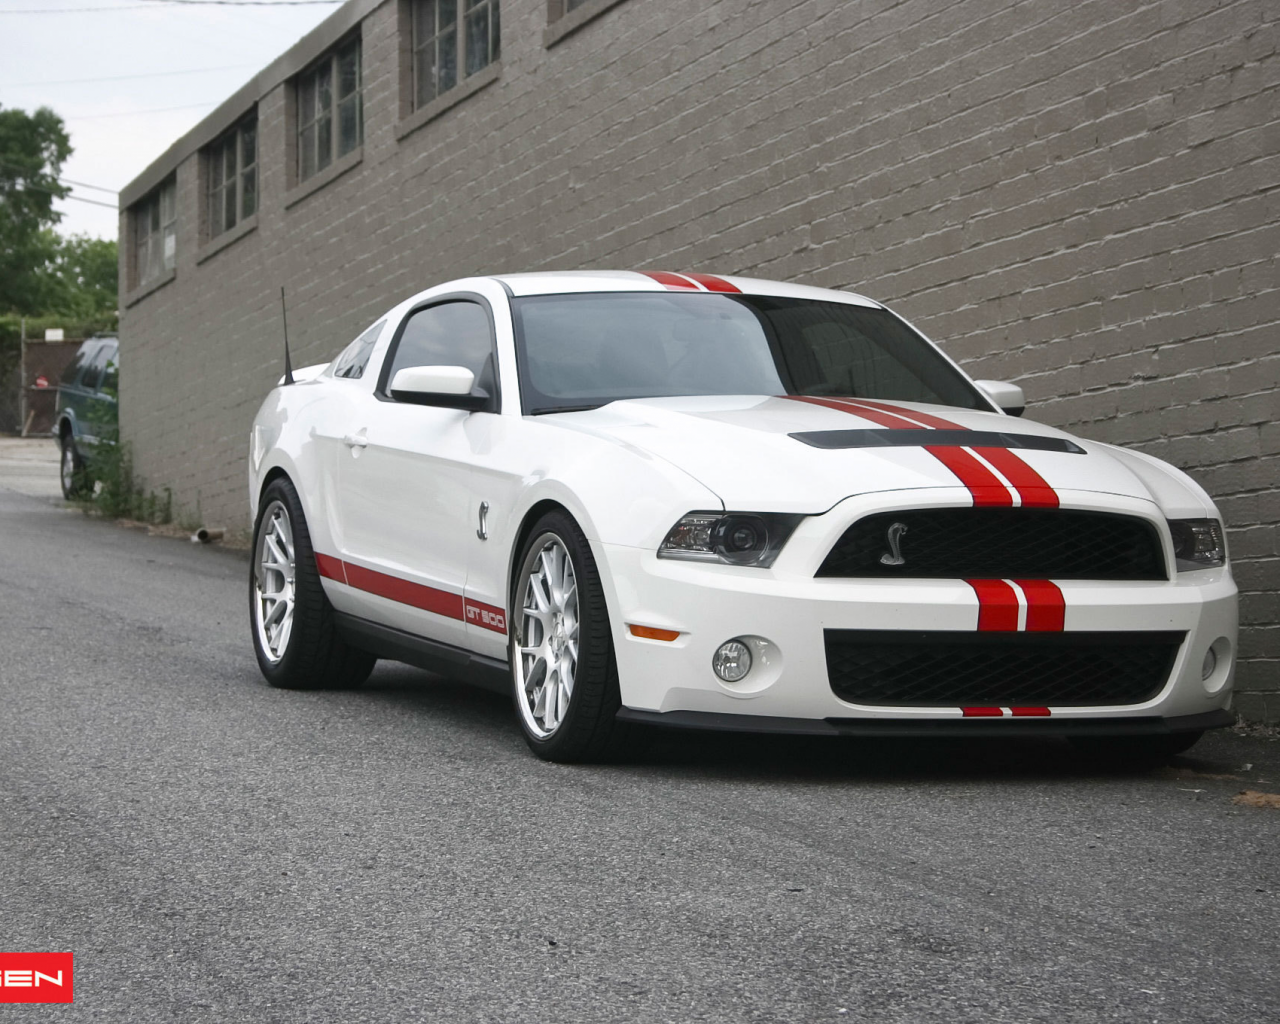 cars, ford, ford, vossen, gt 500